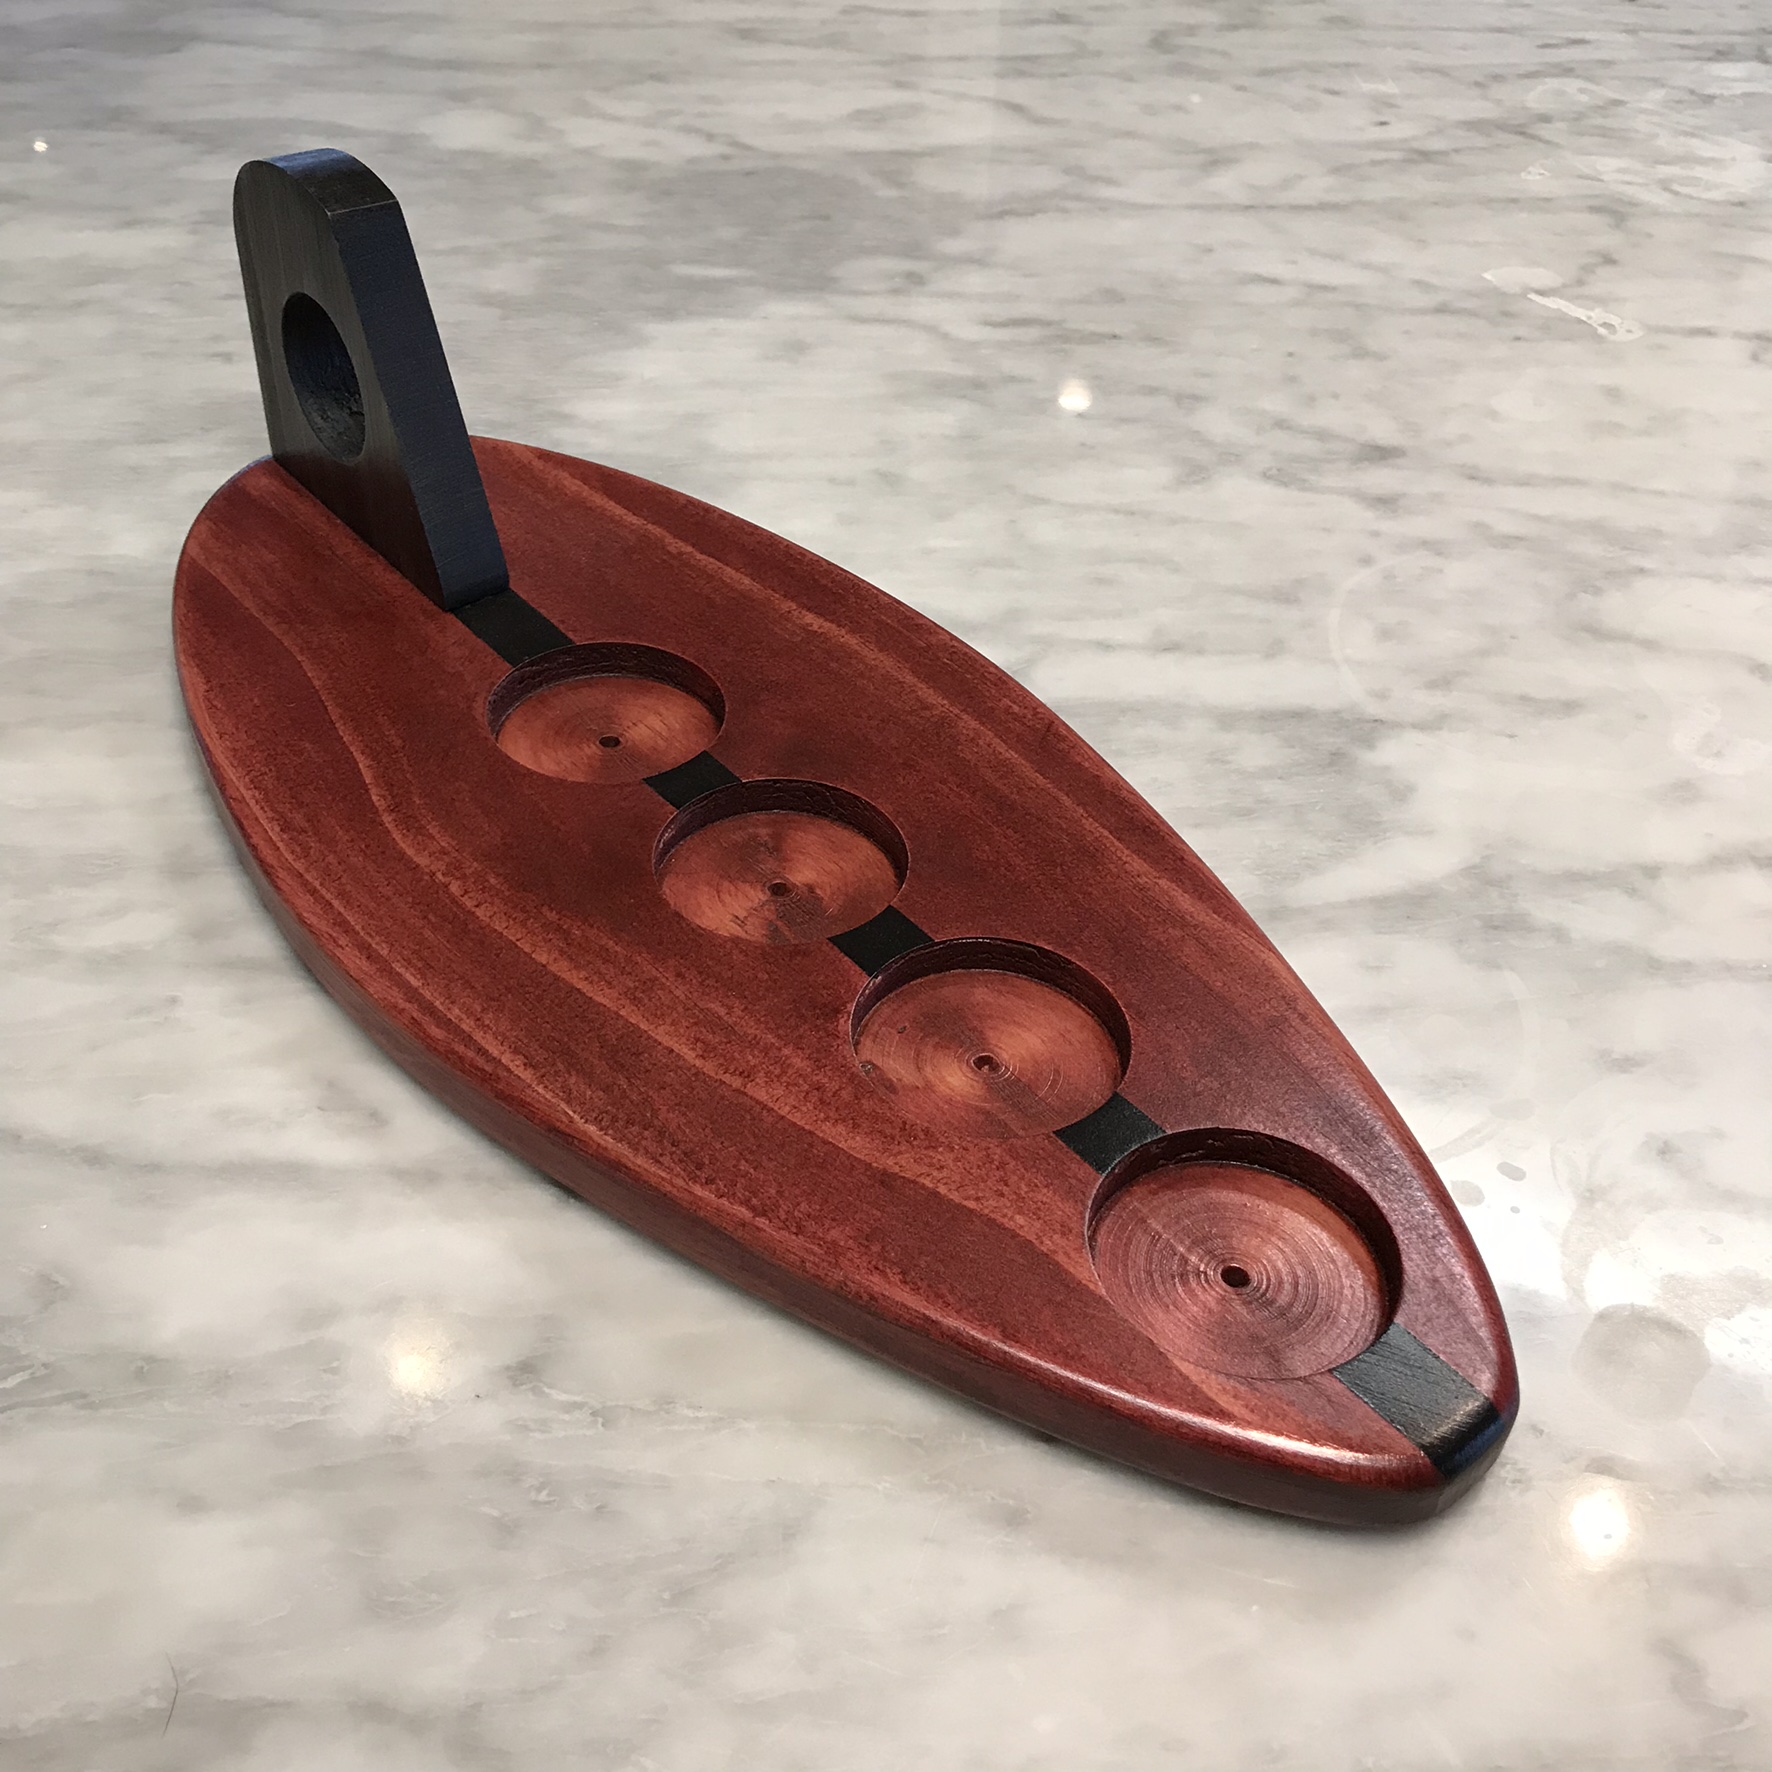 Shortboard surfboard beer flight with fin shaped handle